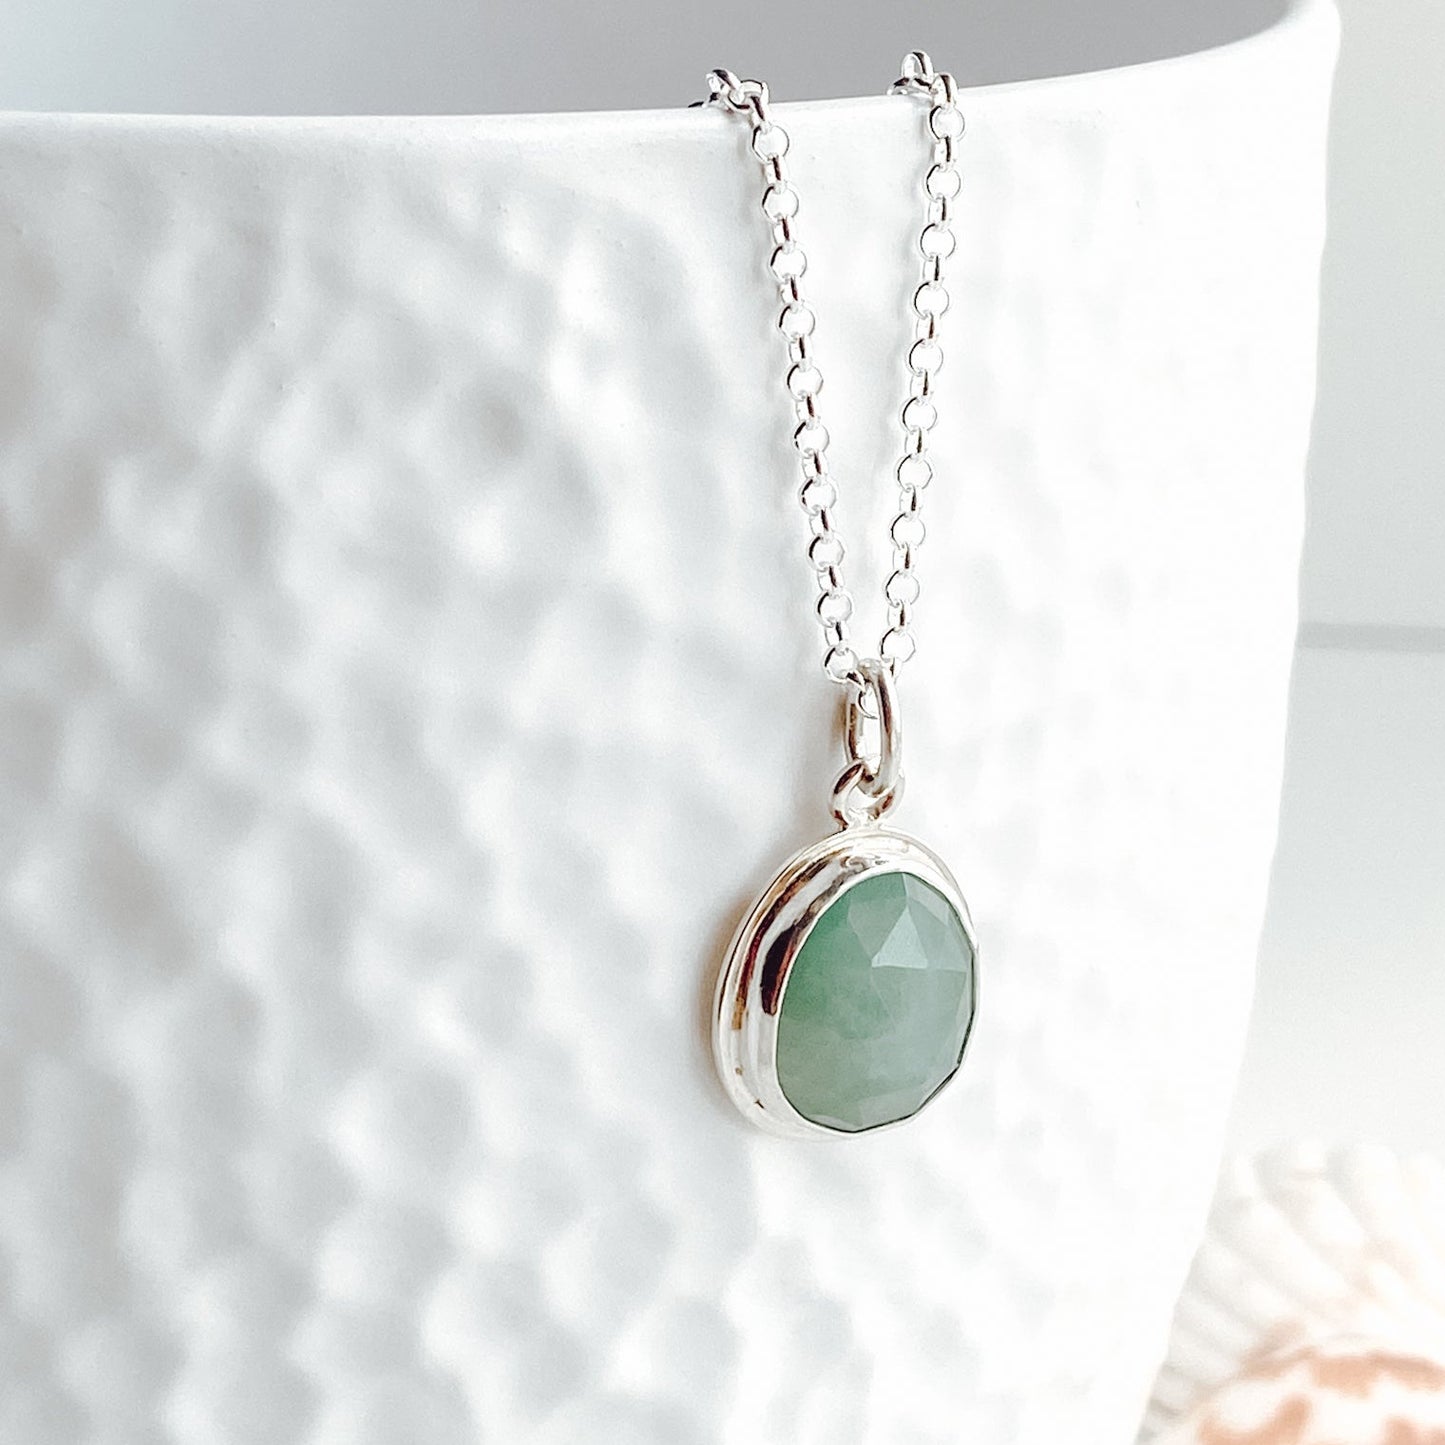 A close up view of an aqua green rose cut gandiderite gemstone pendant displayed on a textured white vase.